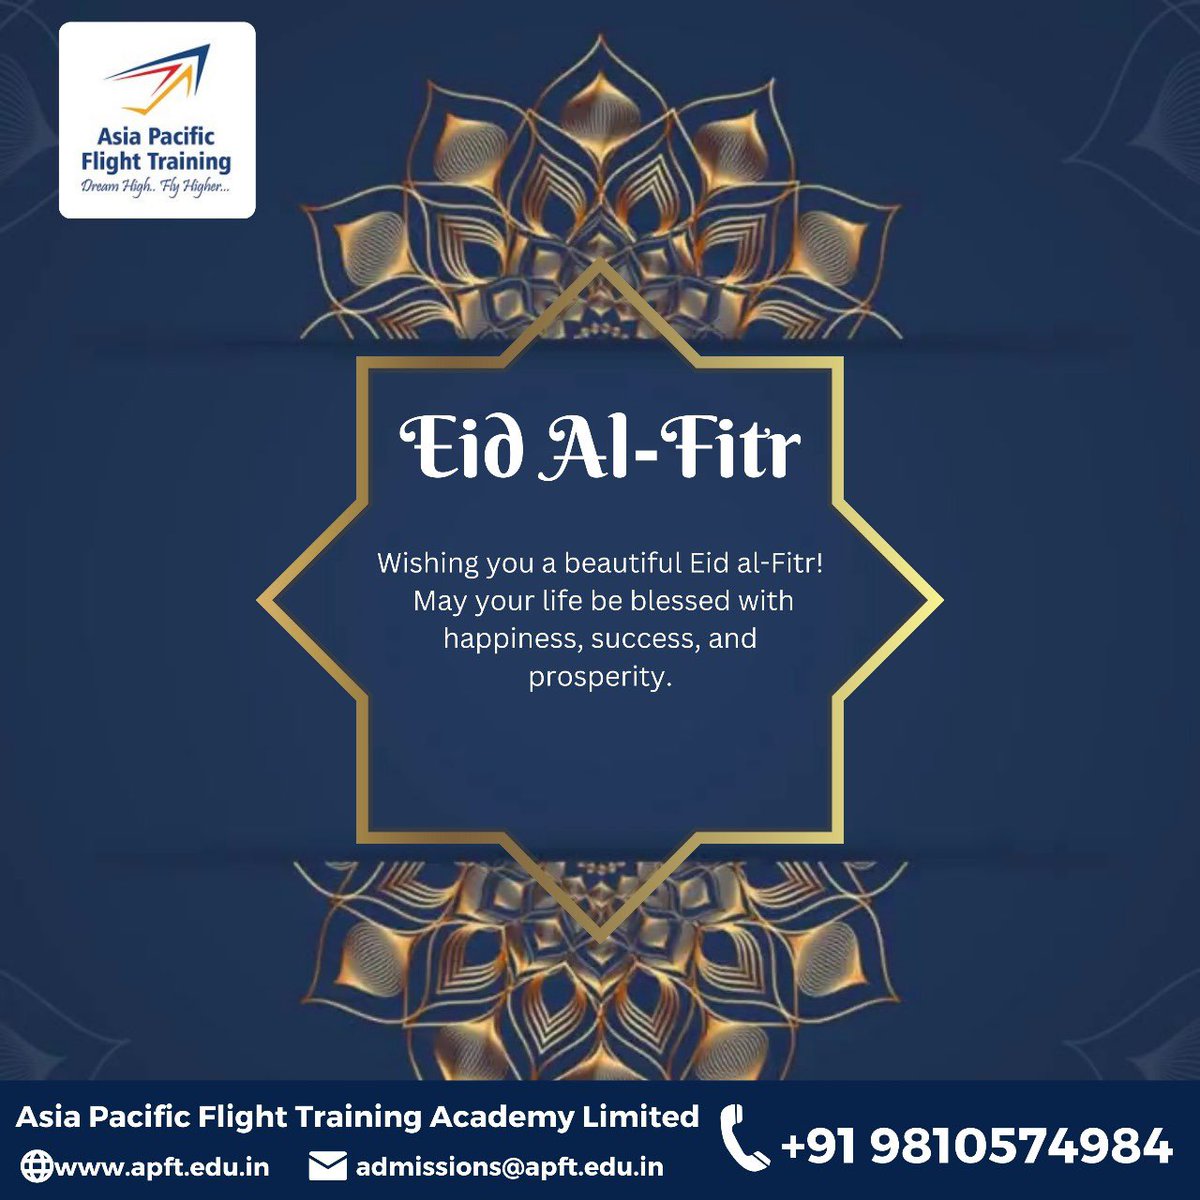 Wishing you a beautiful Eid al-Fitr! May your life be blessed with happiness, success, and prosperity. Visit us: apft.edu.in Write to us: admissions@apft.edu.in Contact us: +91 9810574984 | +91 96678 85710 | +91 96678 81790 #Eid_Mubarak #aviation